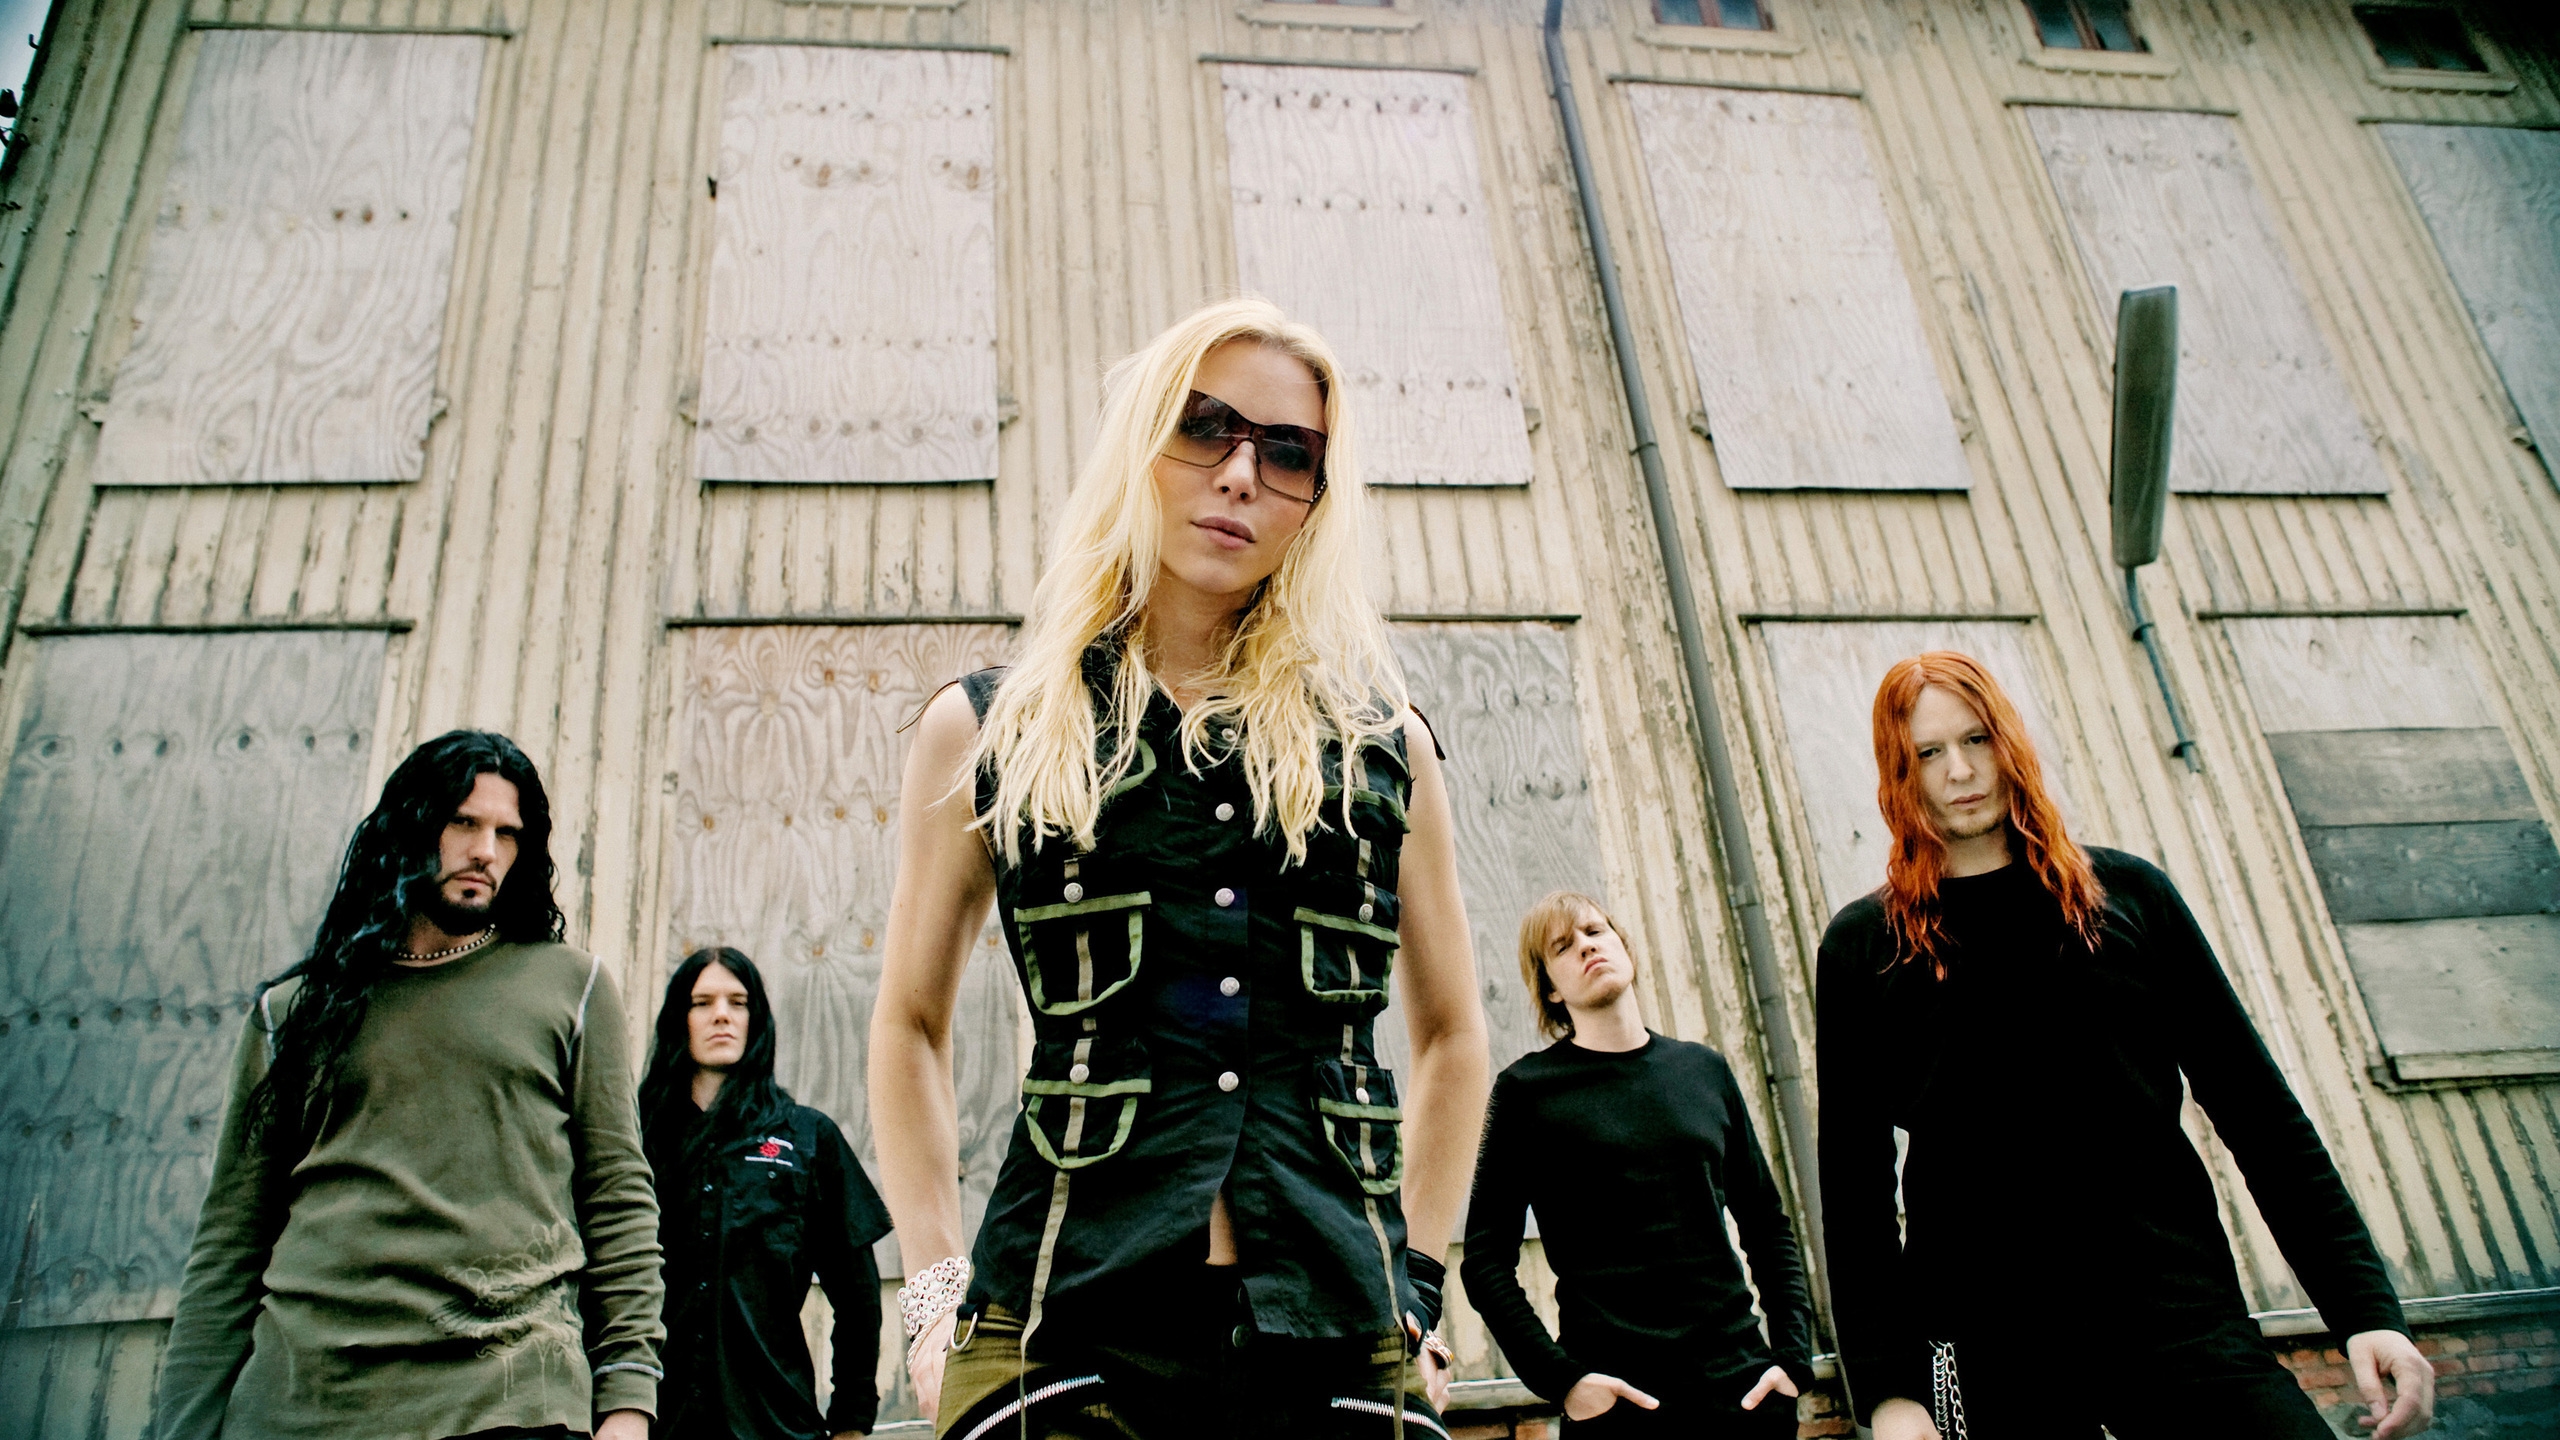 Arch Enemy for 2560x1440 HDTV resolution